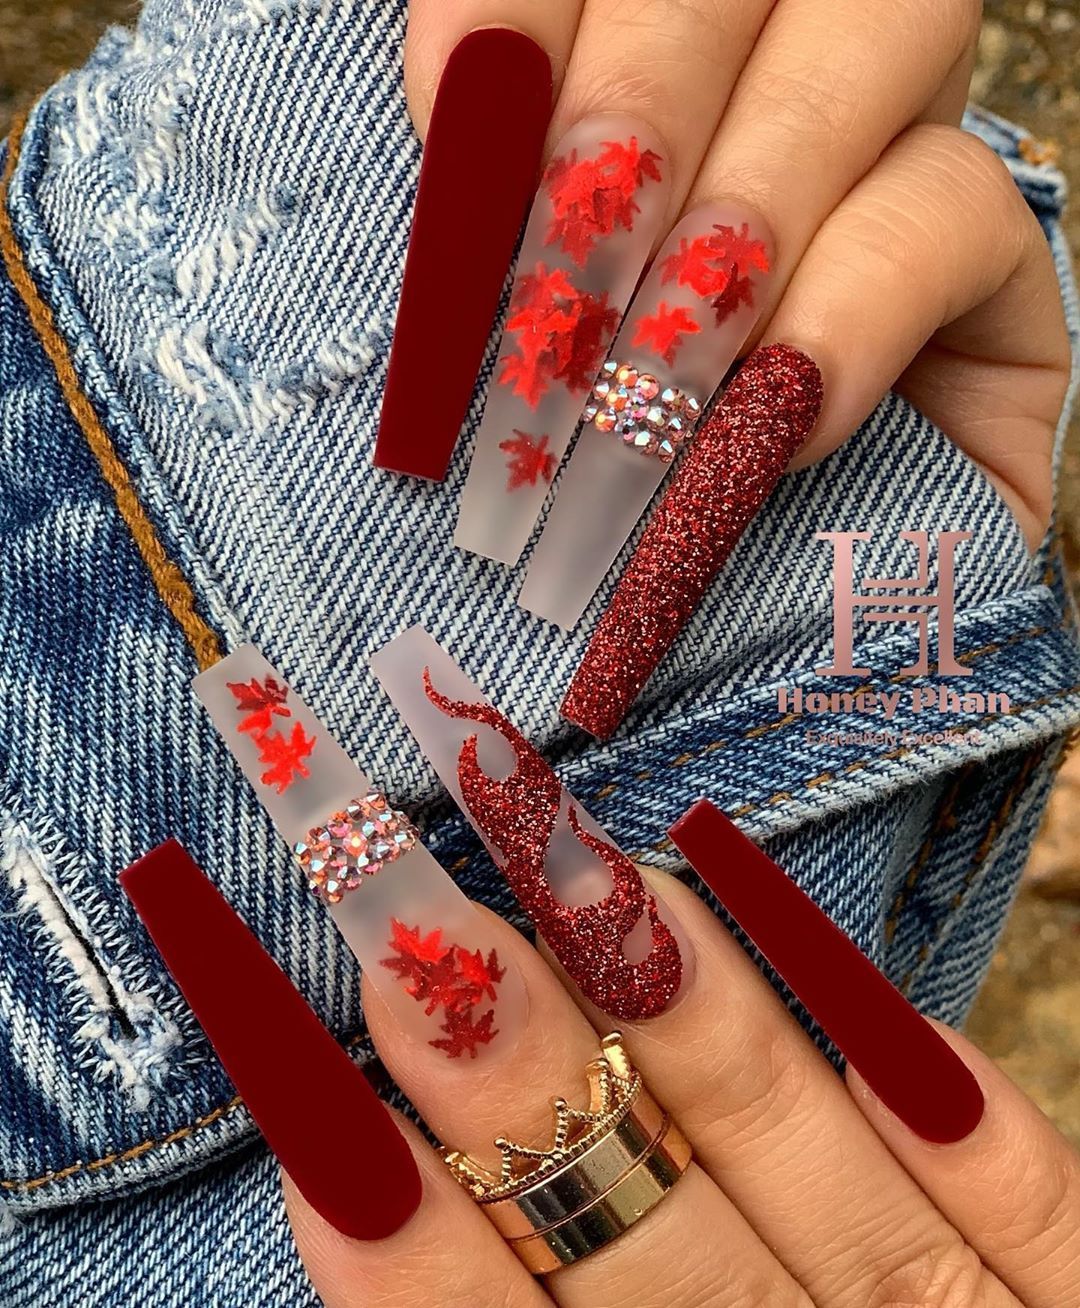 Honey Phan on Instagram: “Keep calm and be a lady in RedпёЏ  Using Sprinkle On Glitters, fall leaves, rhinestones and matte topcoat @honeysnailsecret  —————————…” -   14 thanksgiving nails acrylic coffin simple ideas